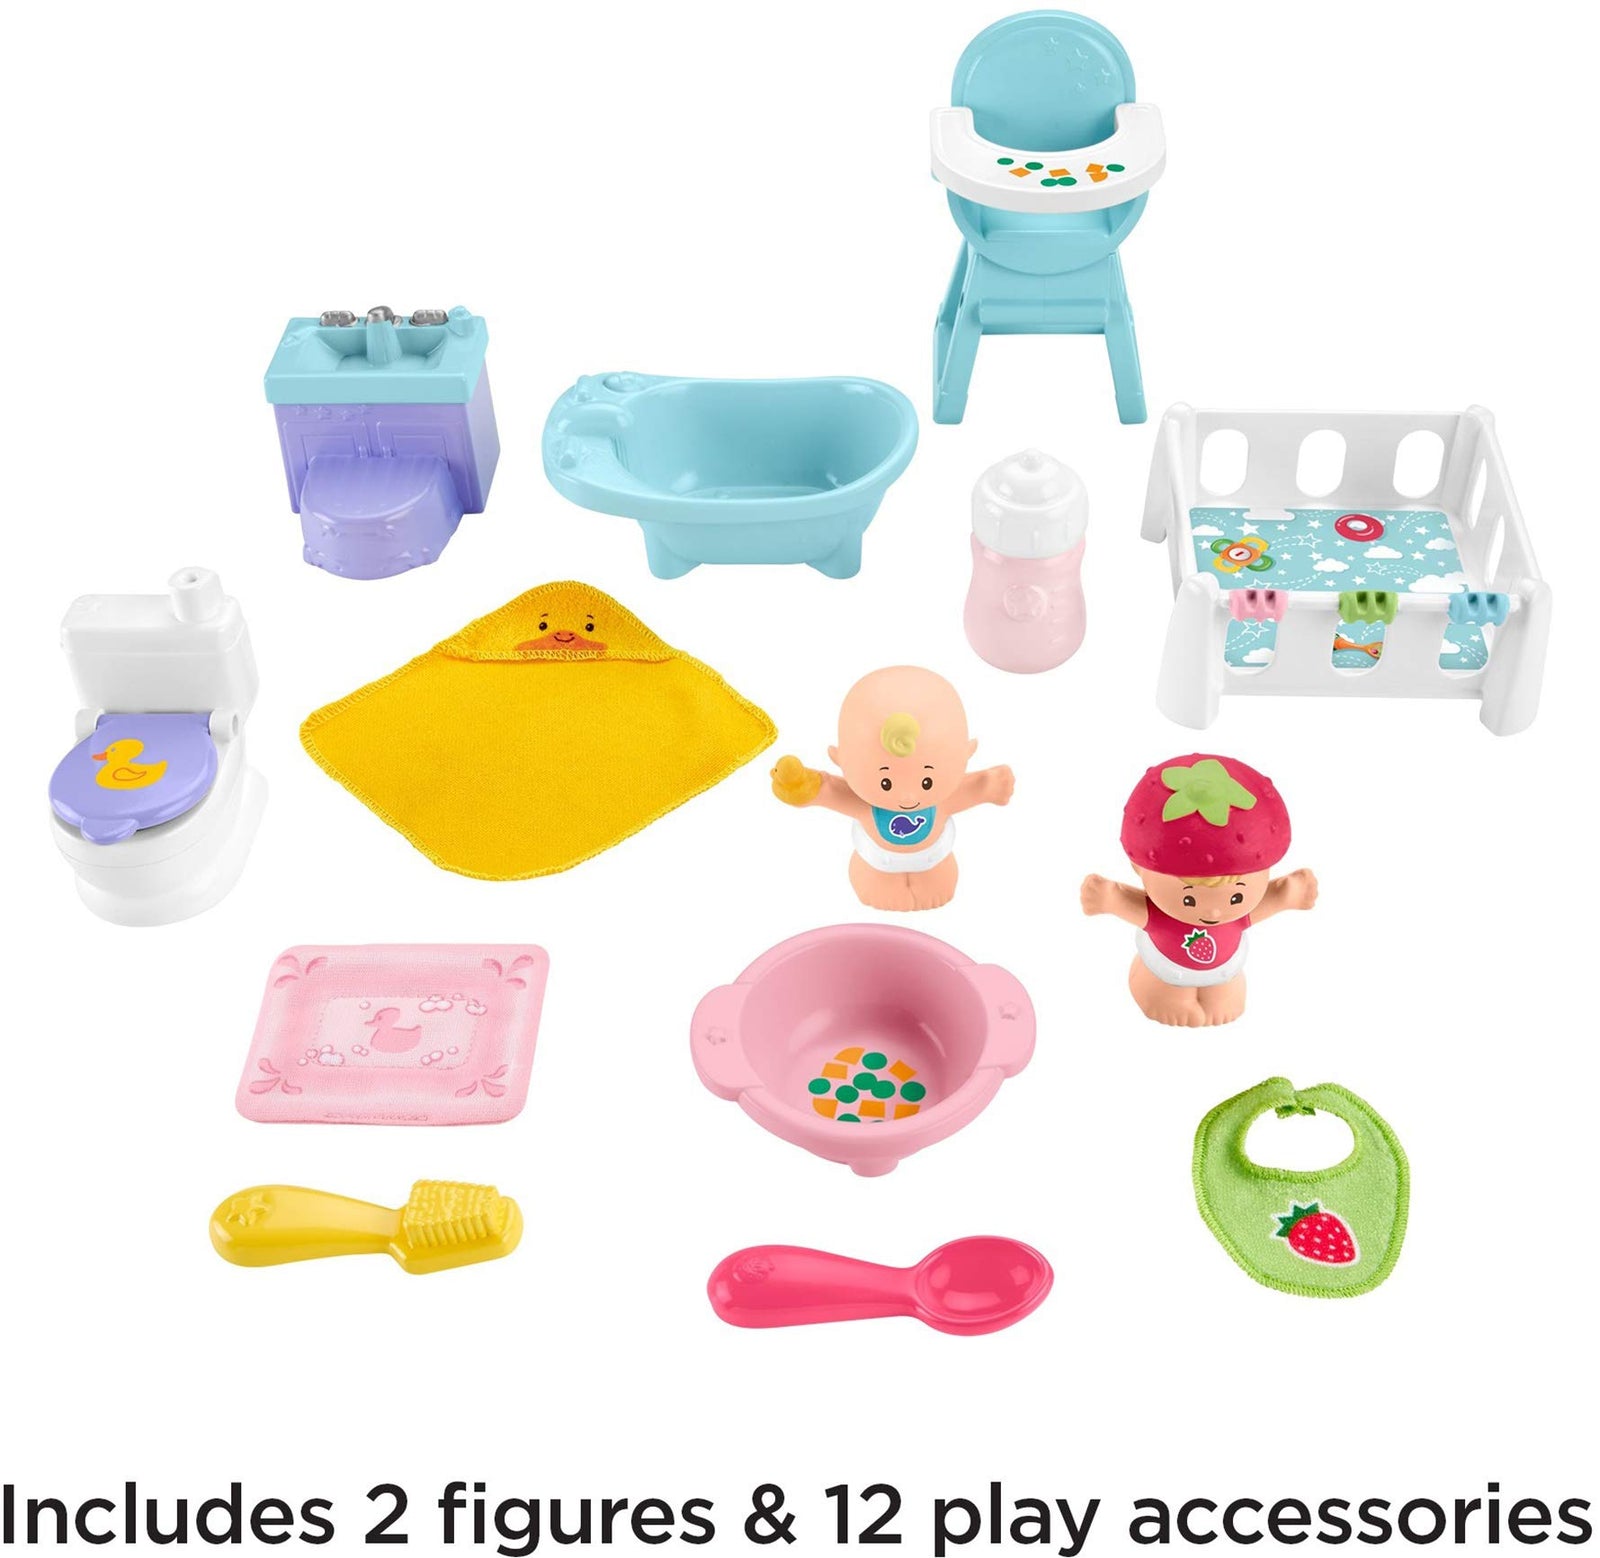 Fisher-Price Little People Babies Love & Care Gift Set, Figure and Accessories Set for Toddlers and Preschool Kids Ages 1 ½ 5 Years